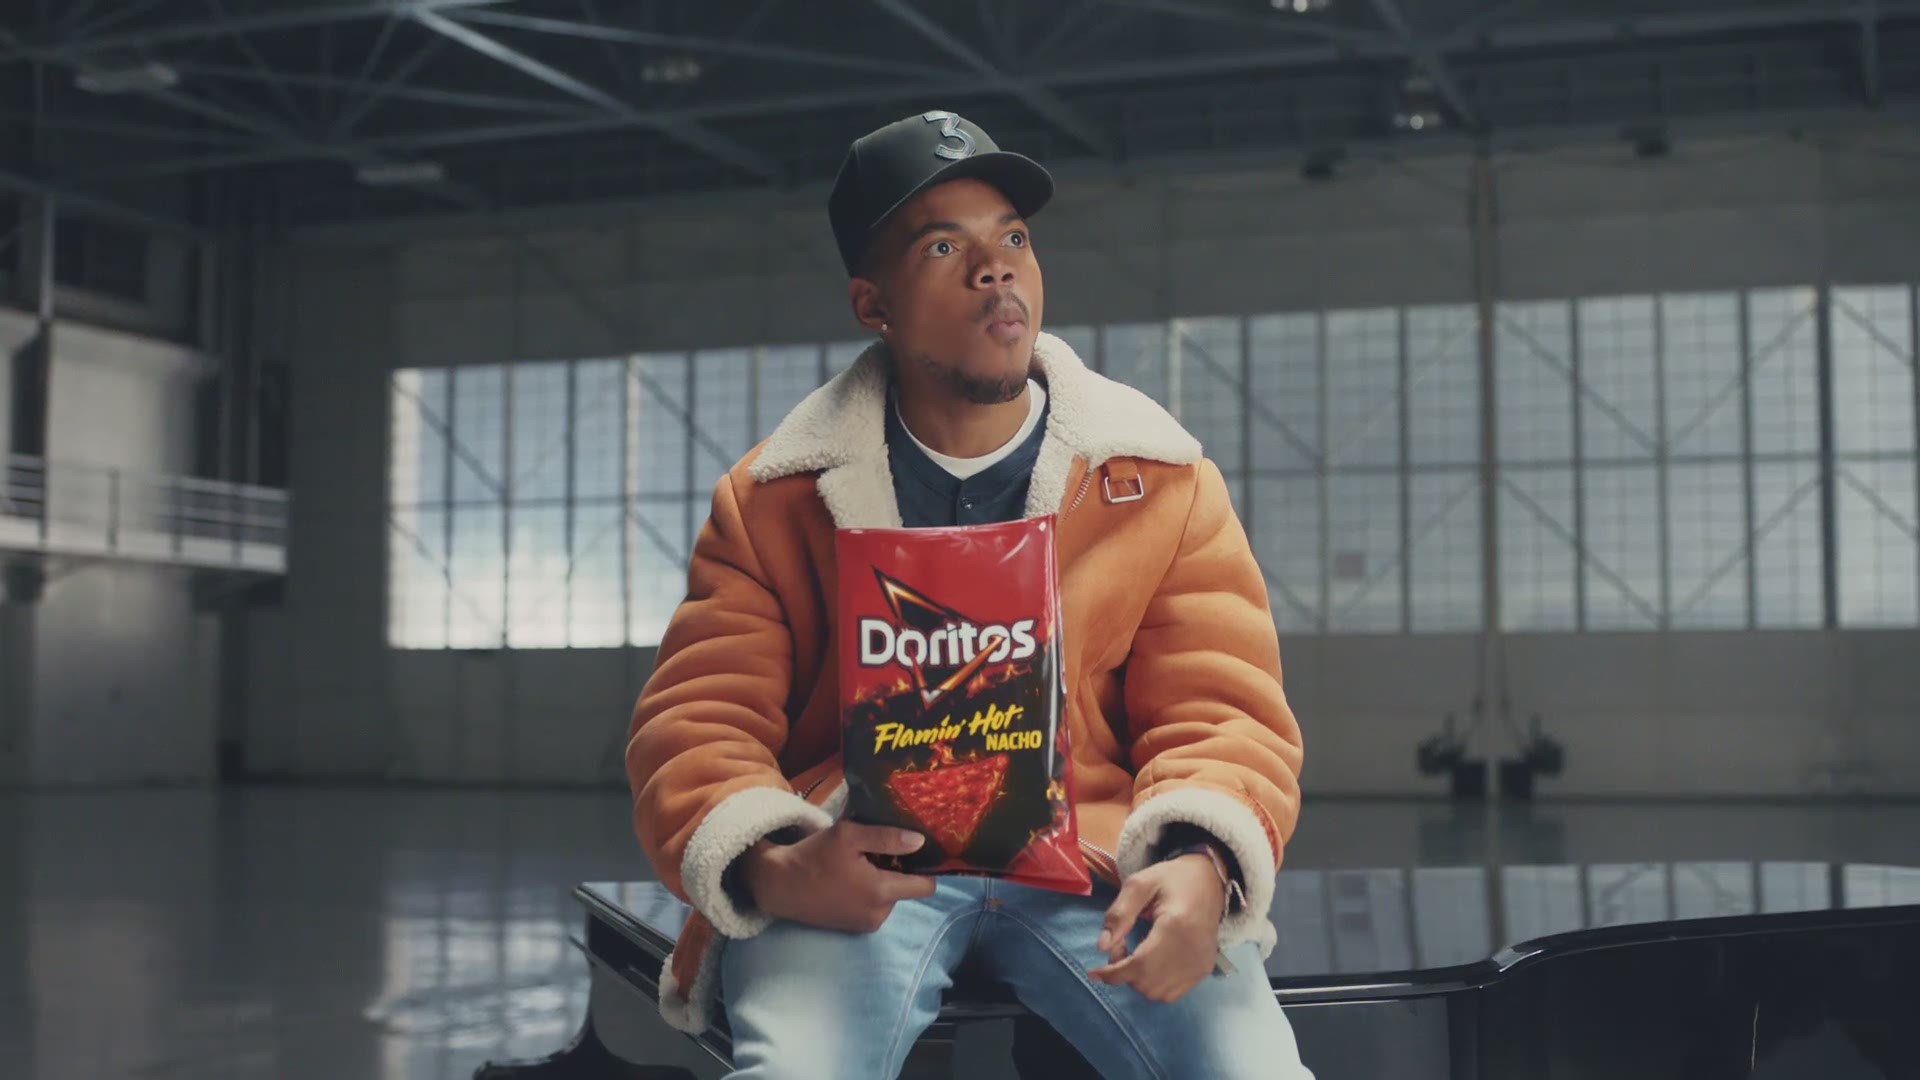 For Doritos' Super Bowl 53 commercial, Chance The Rapper debuts 'his fire version' of the classic Backstreet Boys hit 'I want it that way.'